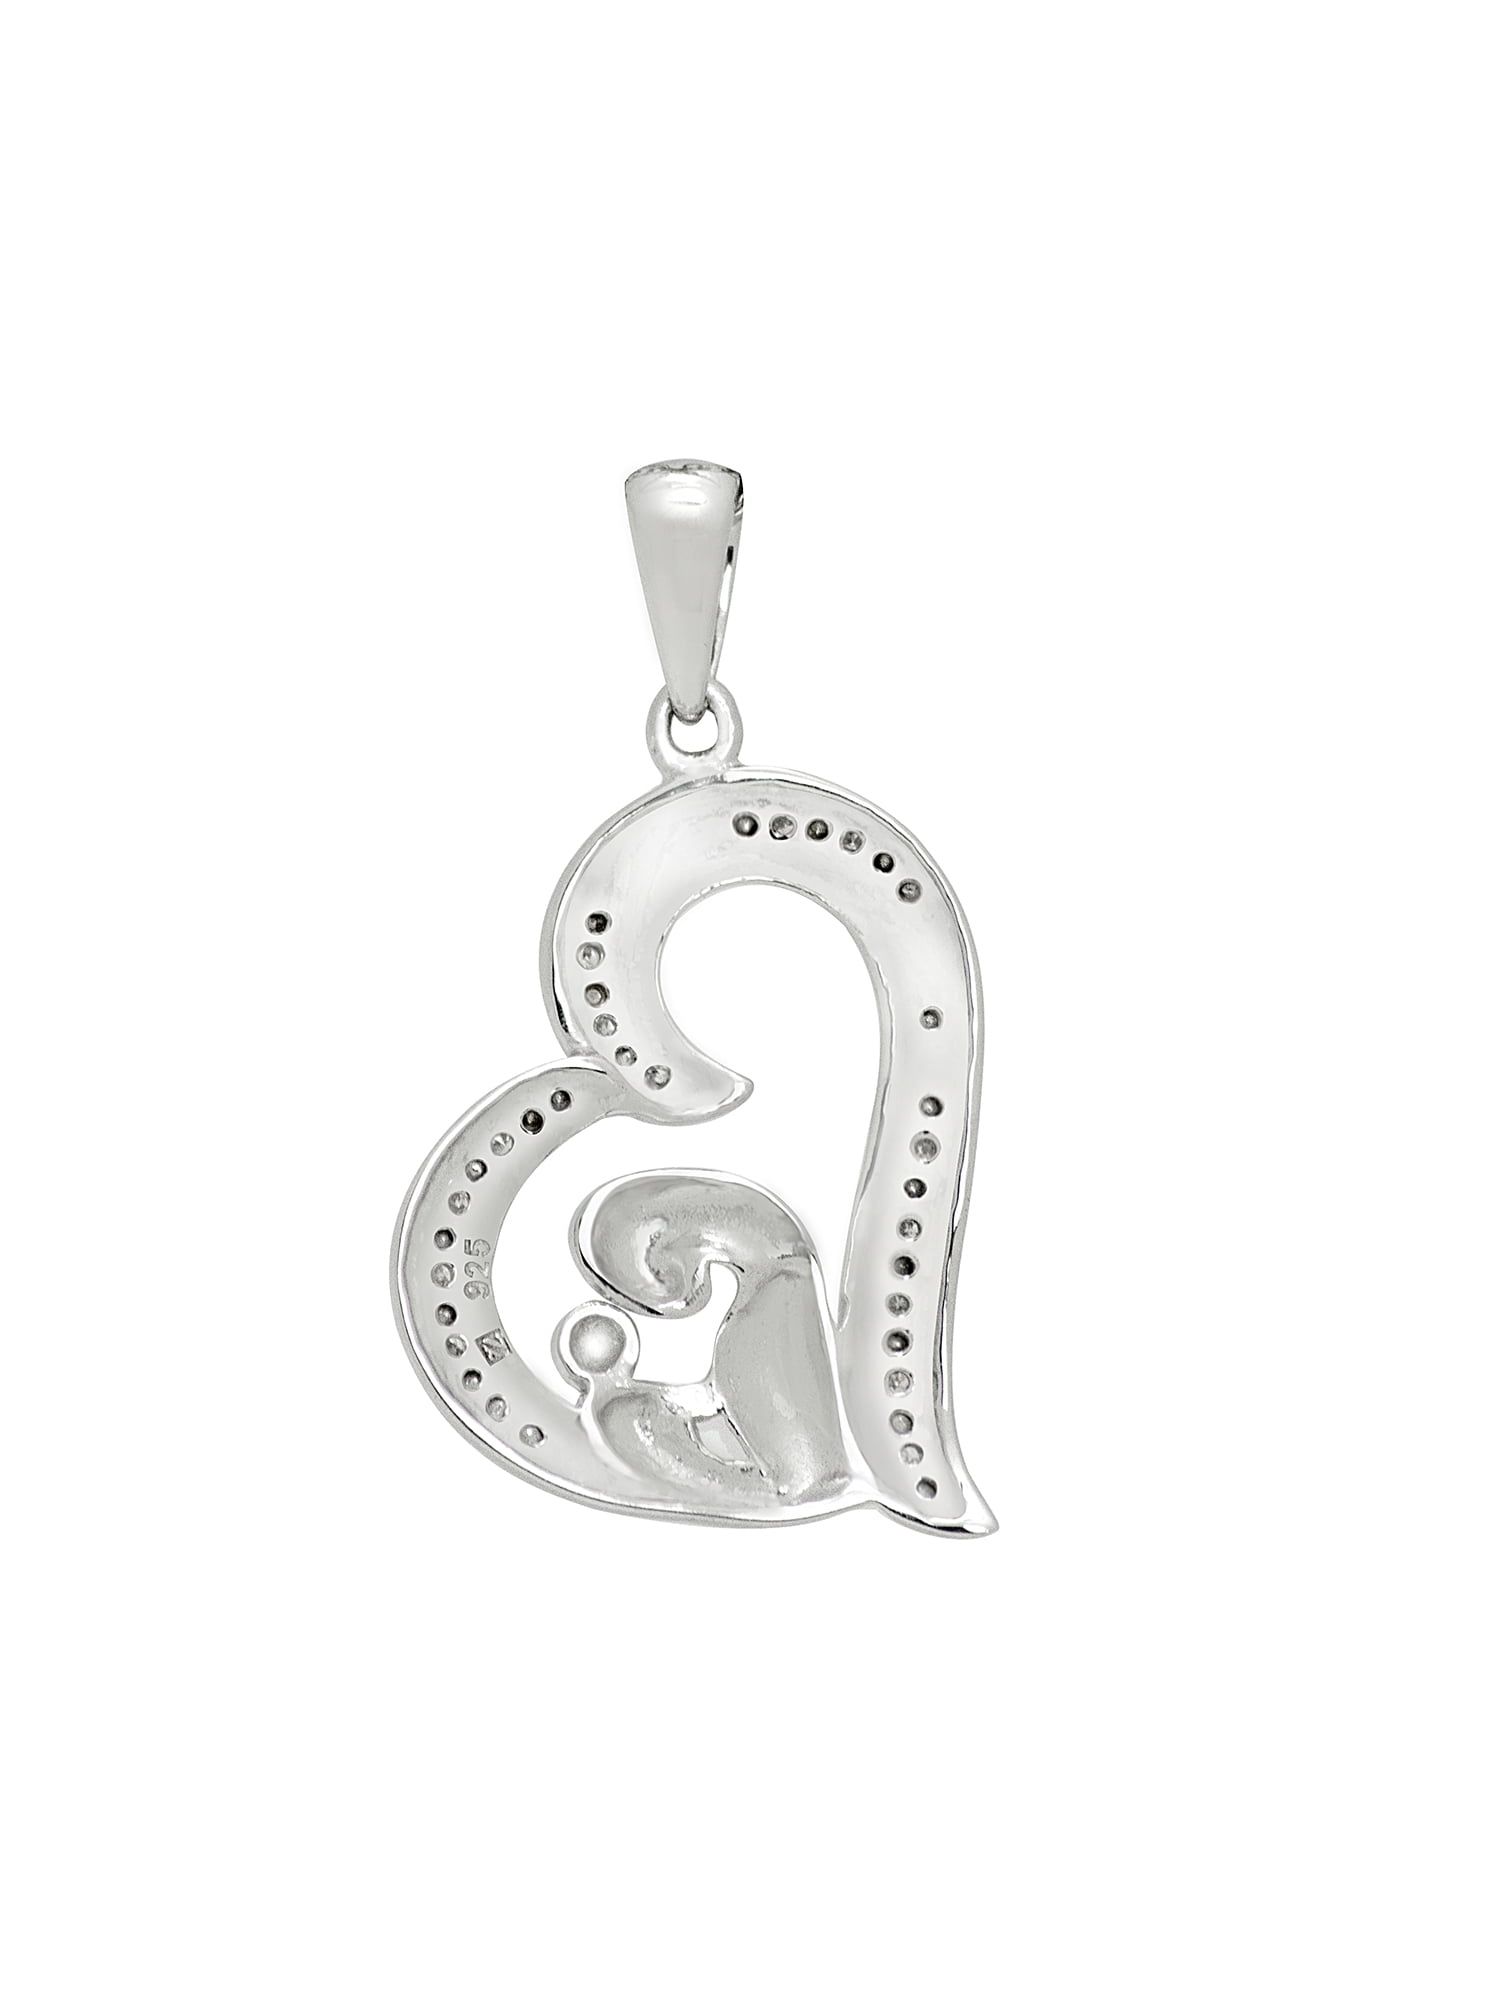 clip on HORSE IN HORSESHOE Sterling Silver Charm 3D EQUESTRAIN Boxed